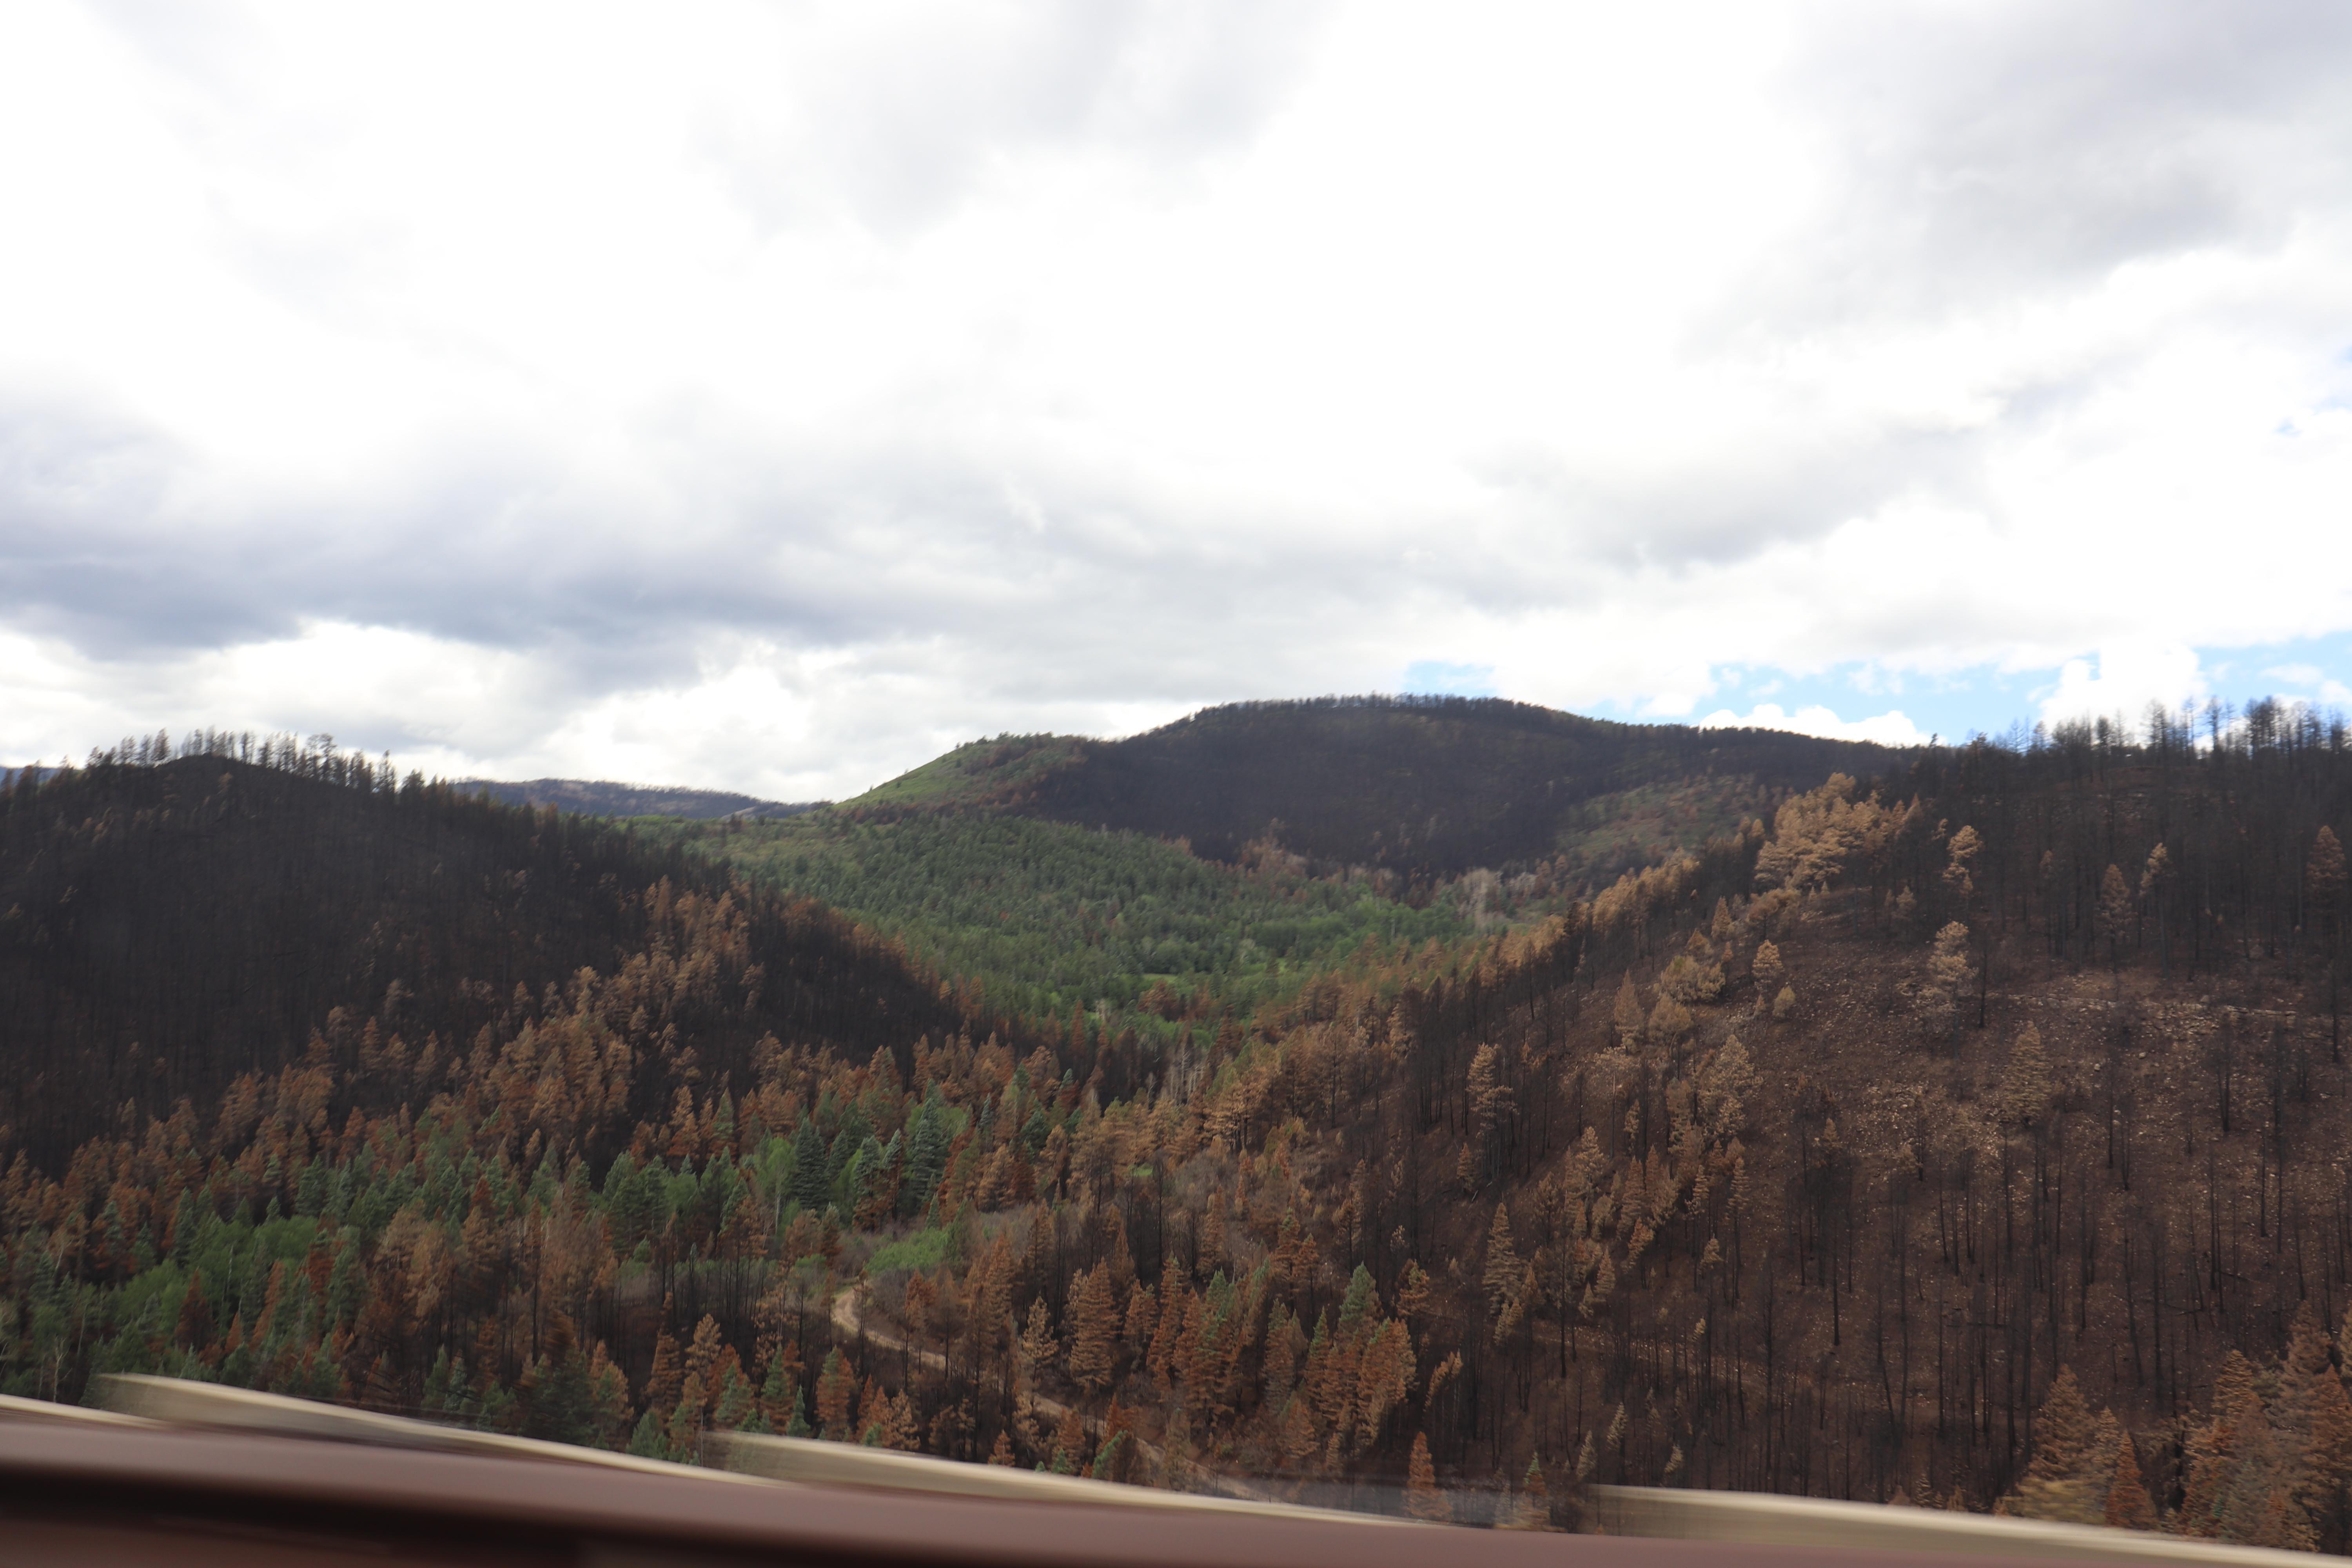 View from Highway 434 of where fire burned,mosaic some trees burned some green, green on mountain from recent  rains